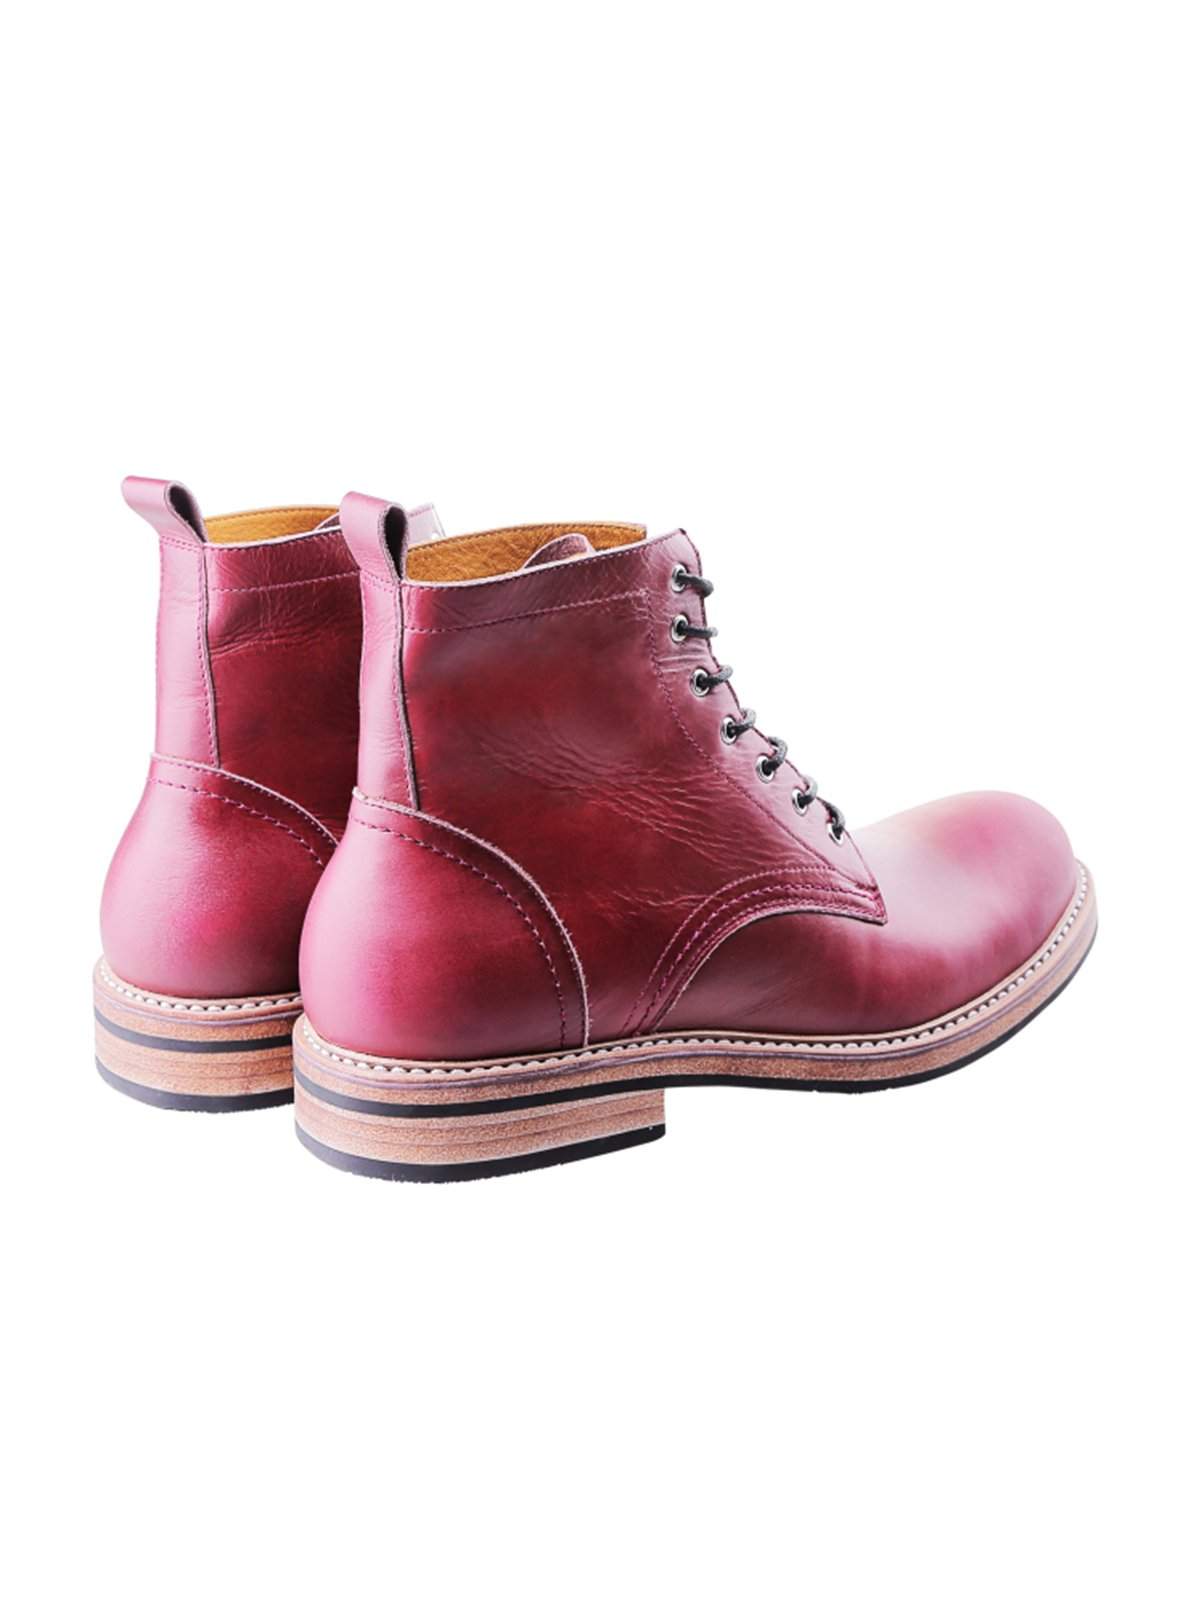 Heimdall Raider Boots Maroon - MORE by Morello Indonesia